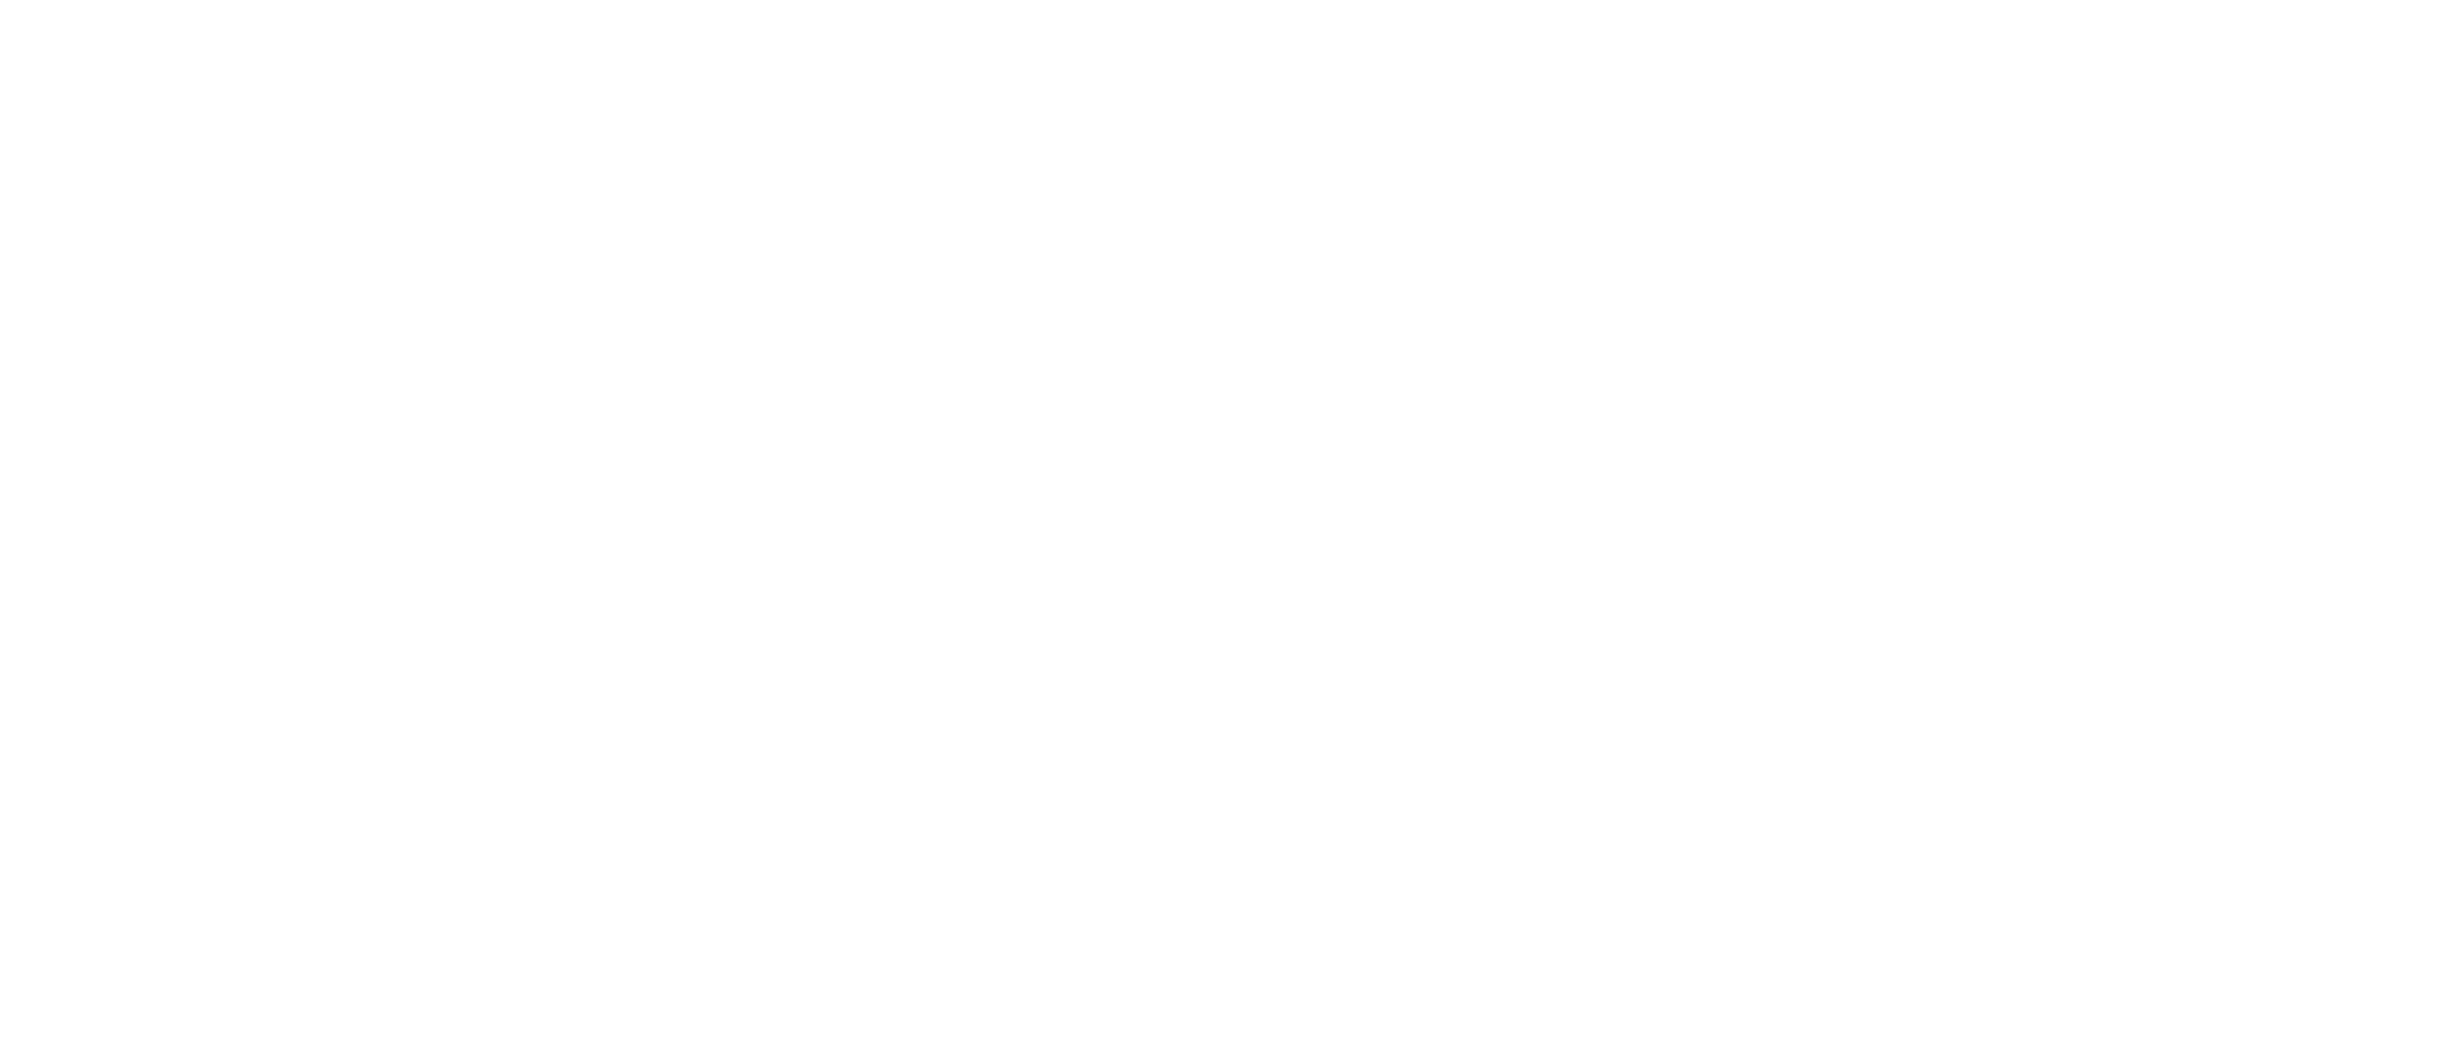 David Lawrence Centers